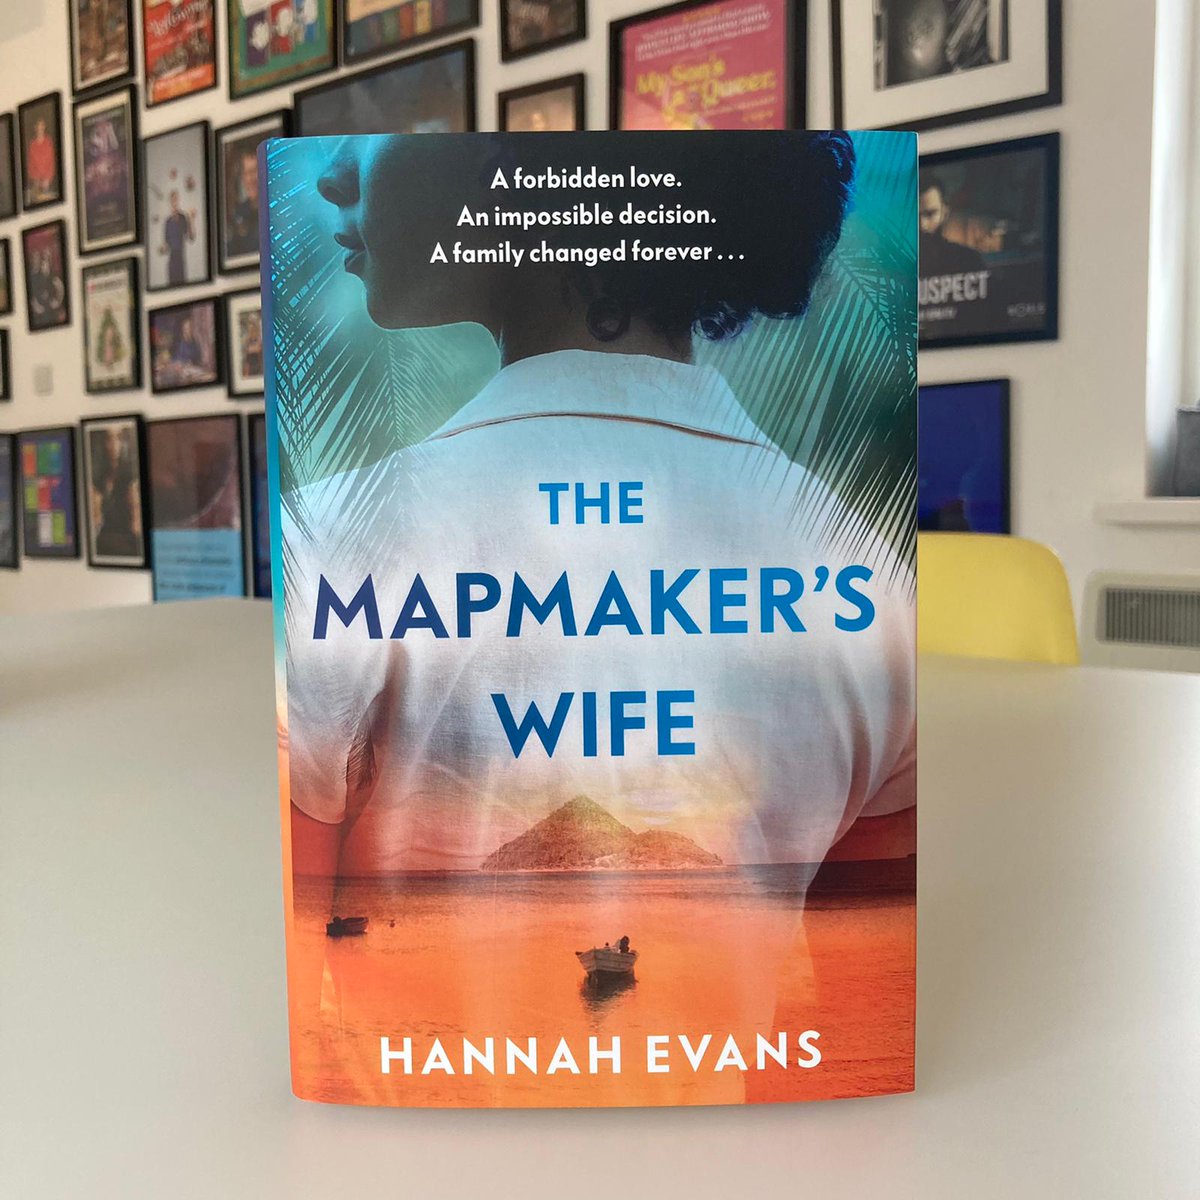 🗺️ Wishing a very happy publication day to @_hannahevans and #TheMapmakersWife 📖 Published today by @orionbooks